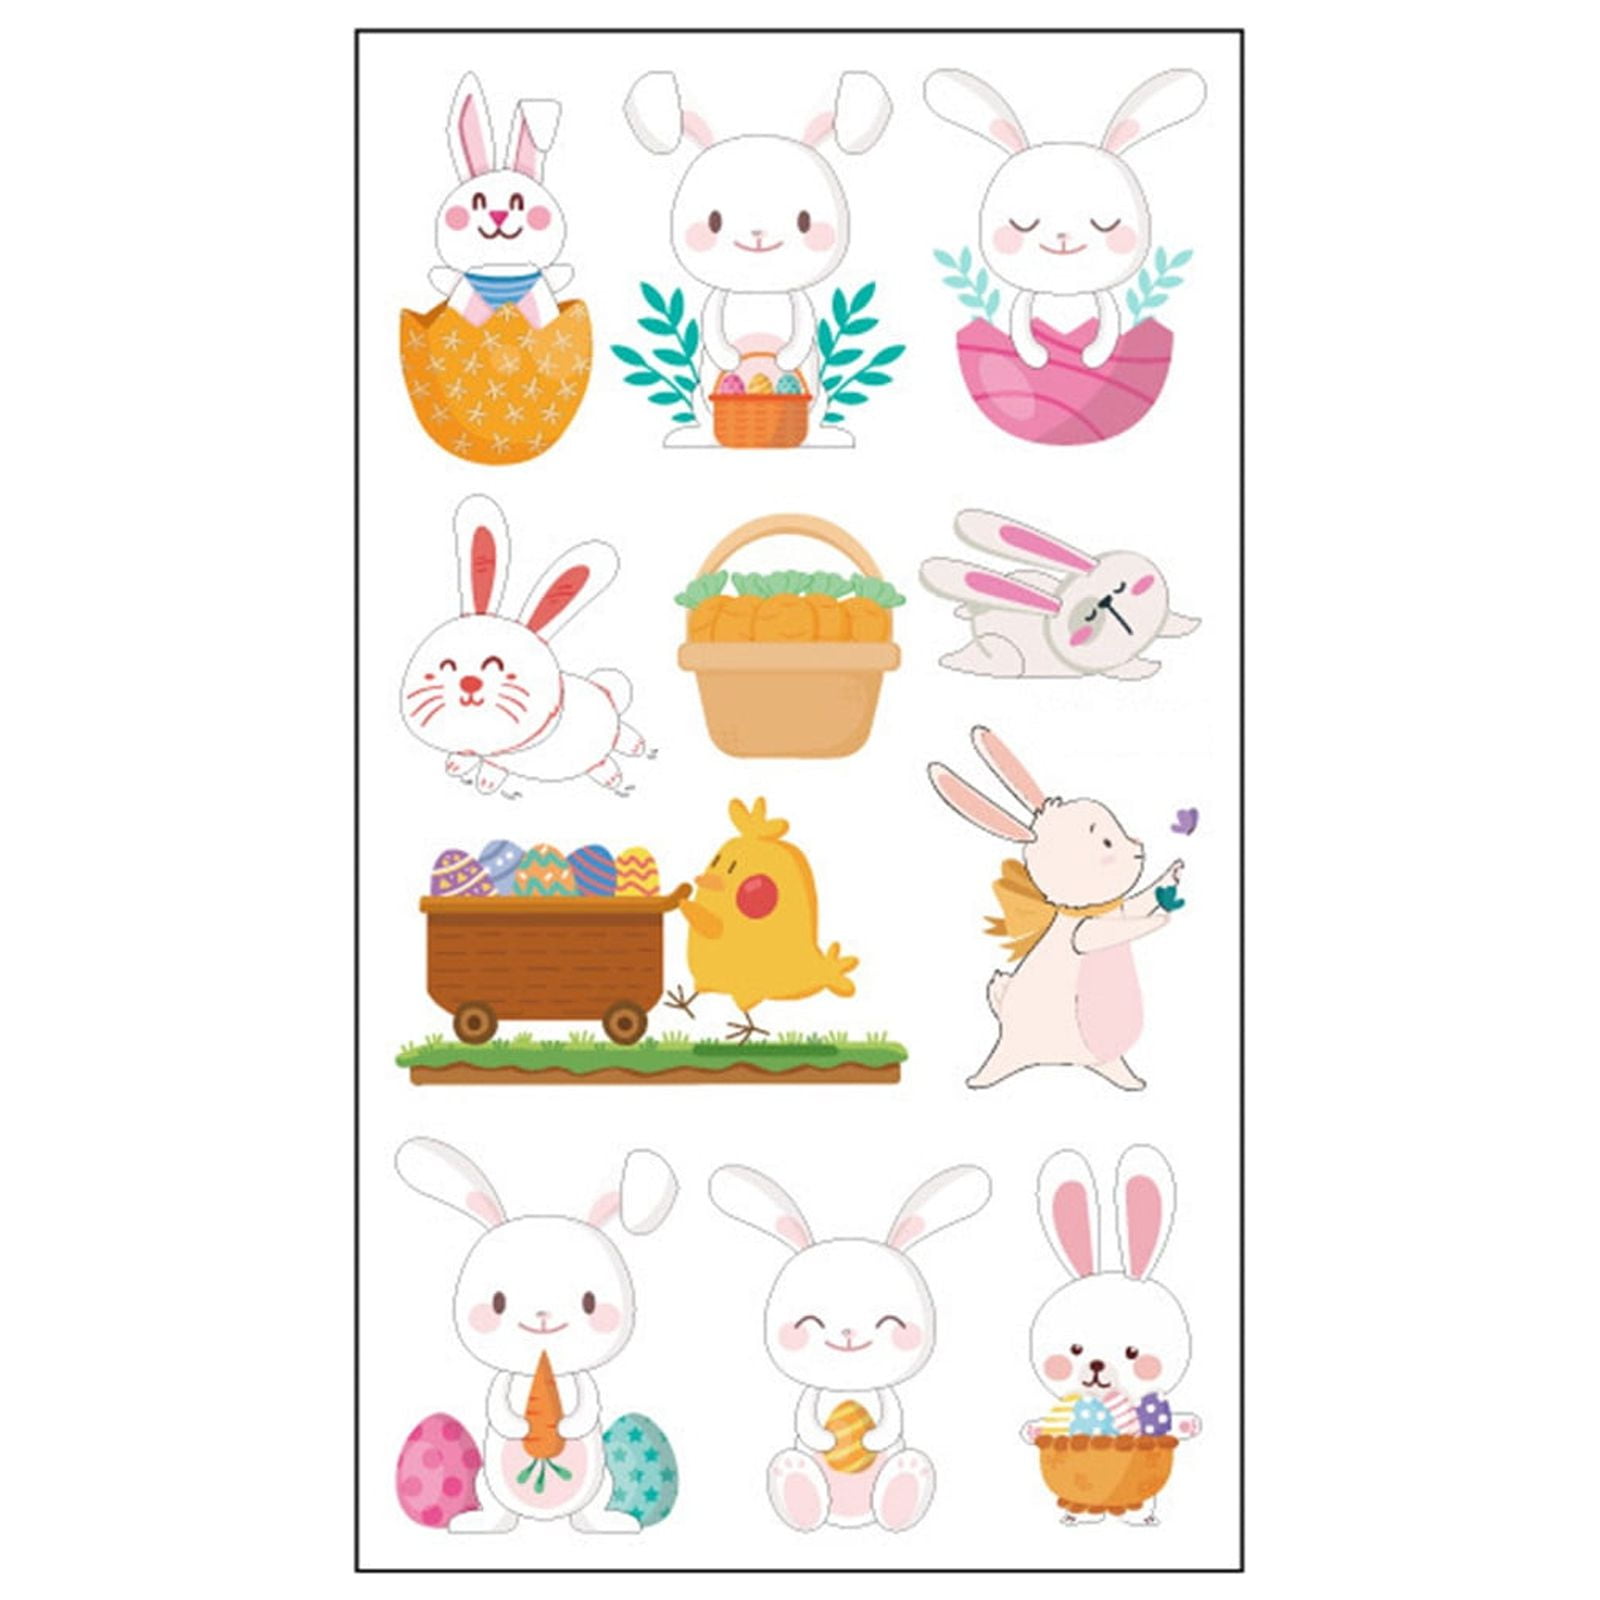 Zadanr Stickers 1 Sheet Easter Sticker Body Temporary Art Painting ...